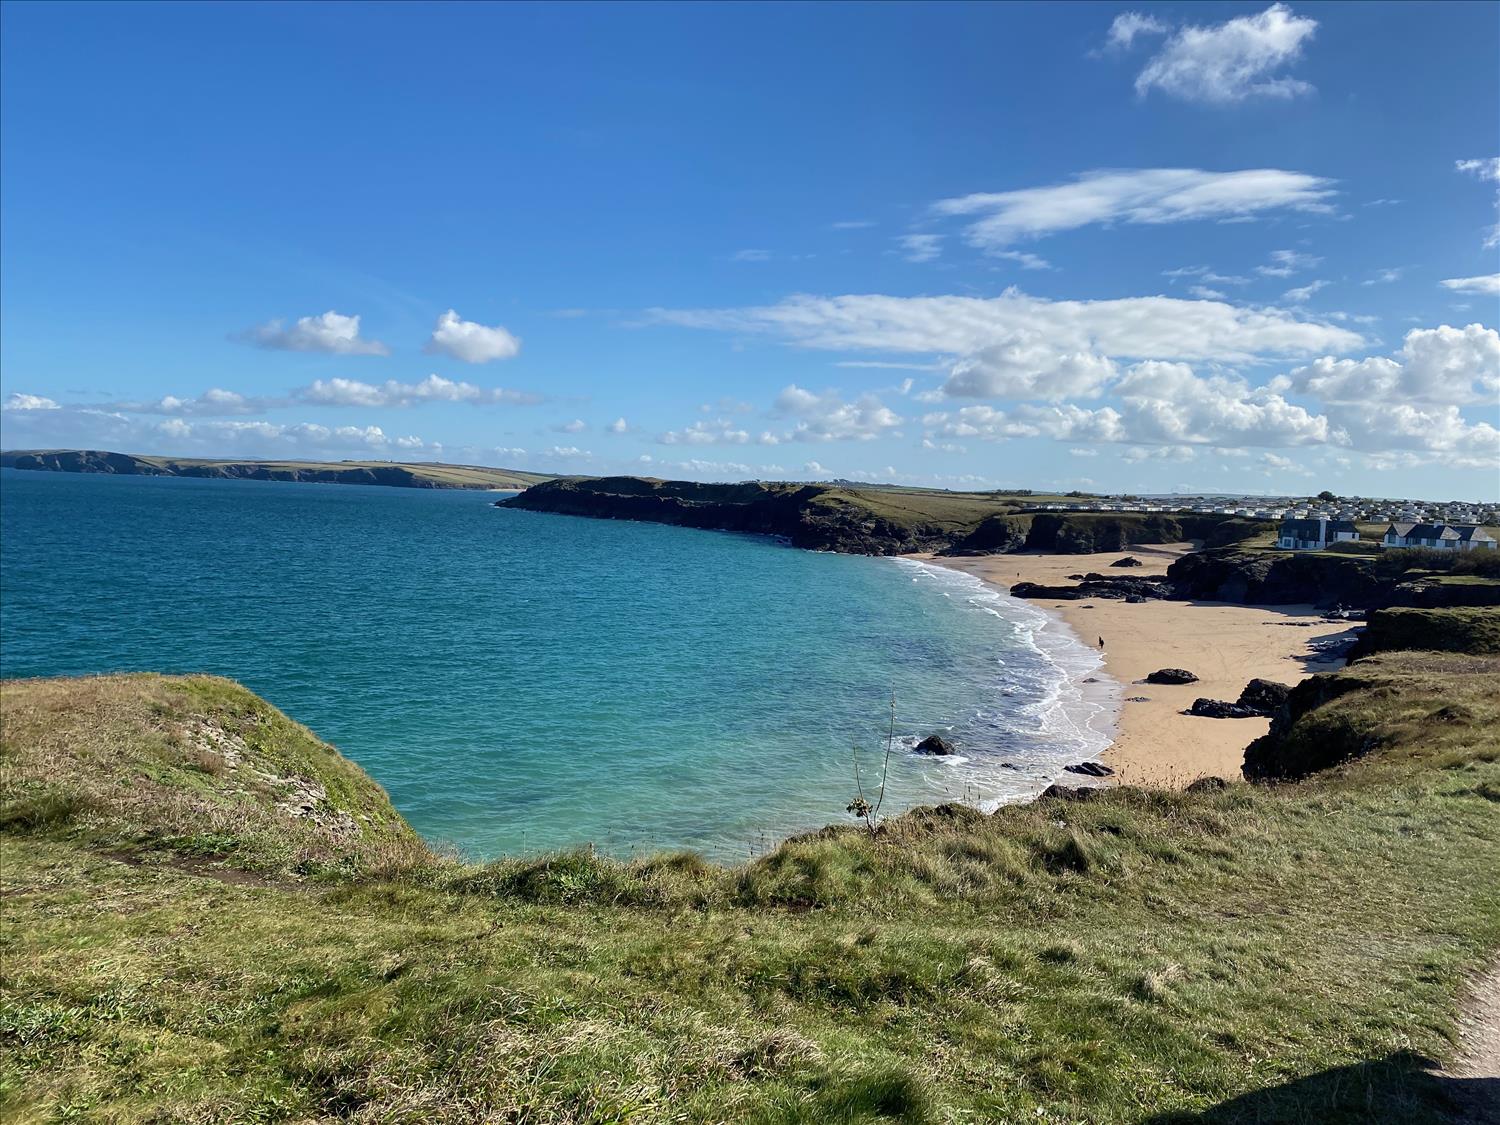 SW of Padstow, any one of the seven bays are well worth a visit. With their light golden sand and turquoise waters, they are the ideal playground for beach bums, especially when the sun shines as in this picture.